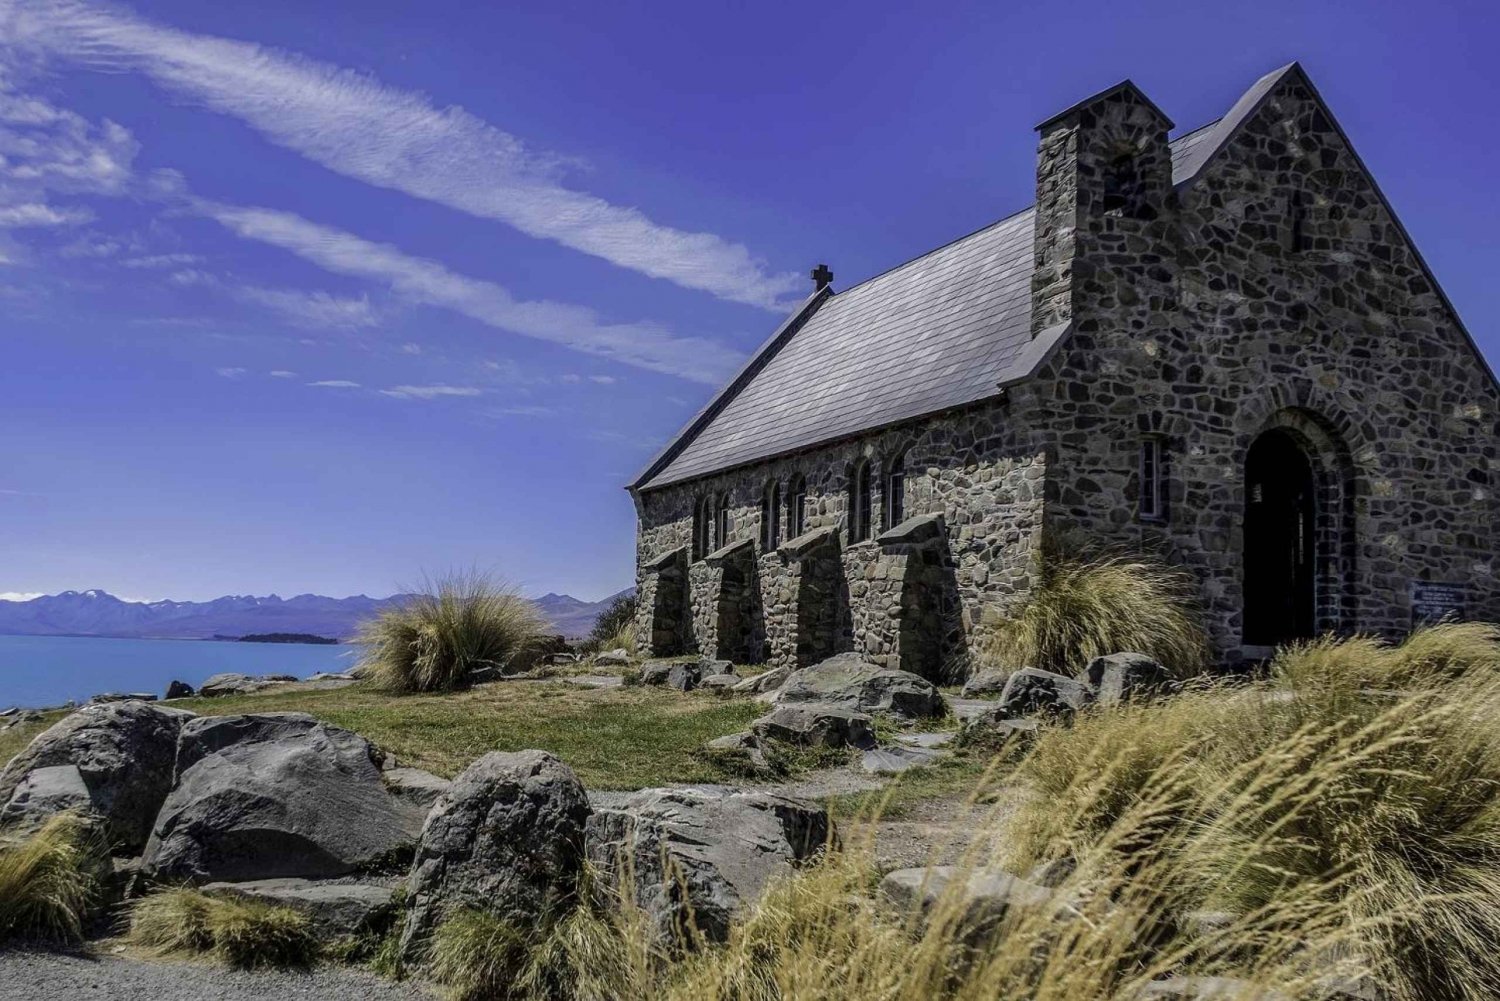 From Queenstown: 1 Way to Tour Christchurch via Mt Cook